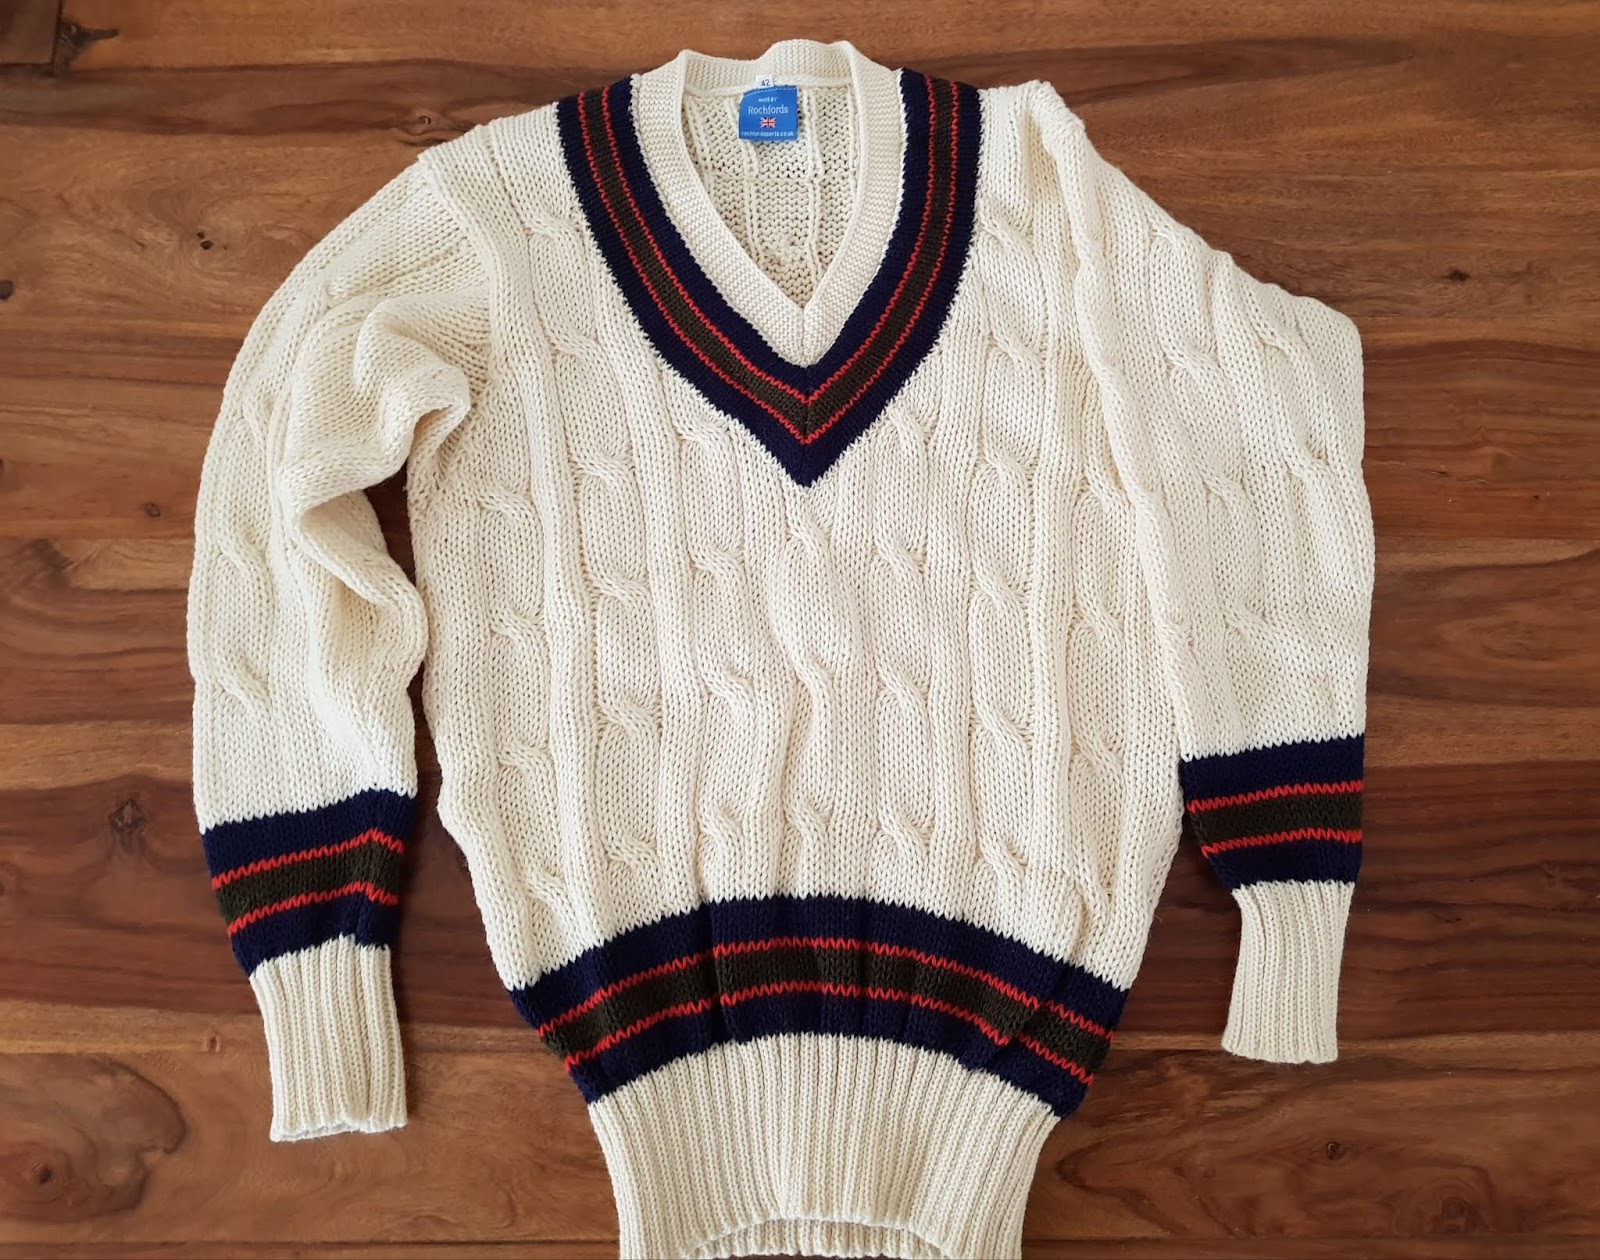 Landless Gentry: Newly Arrived: Custom Cricket Sweater from Rochford ...